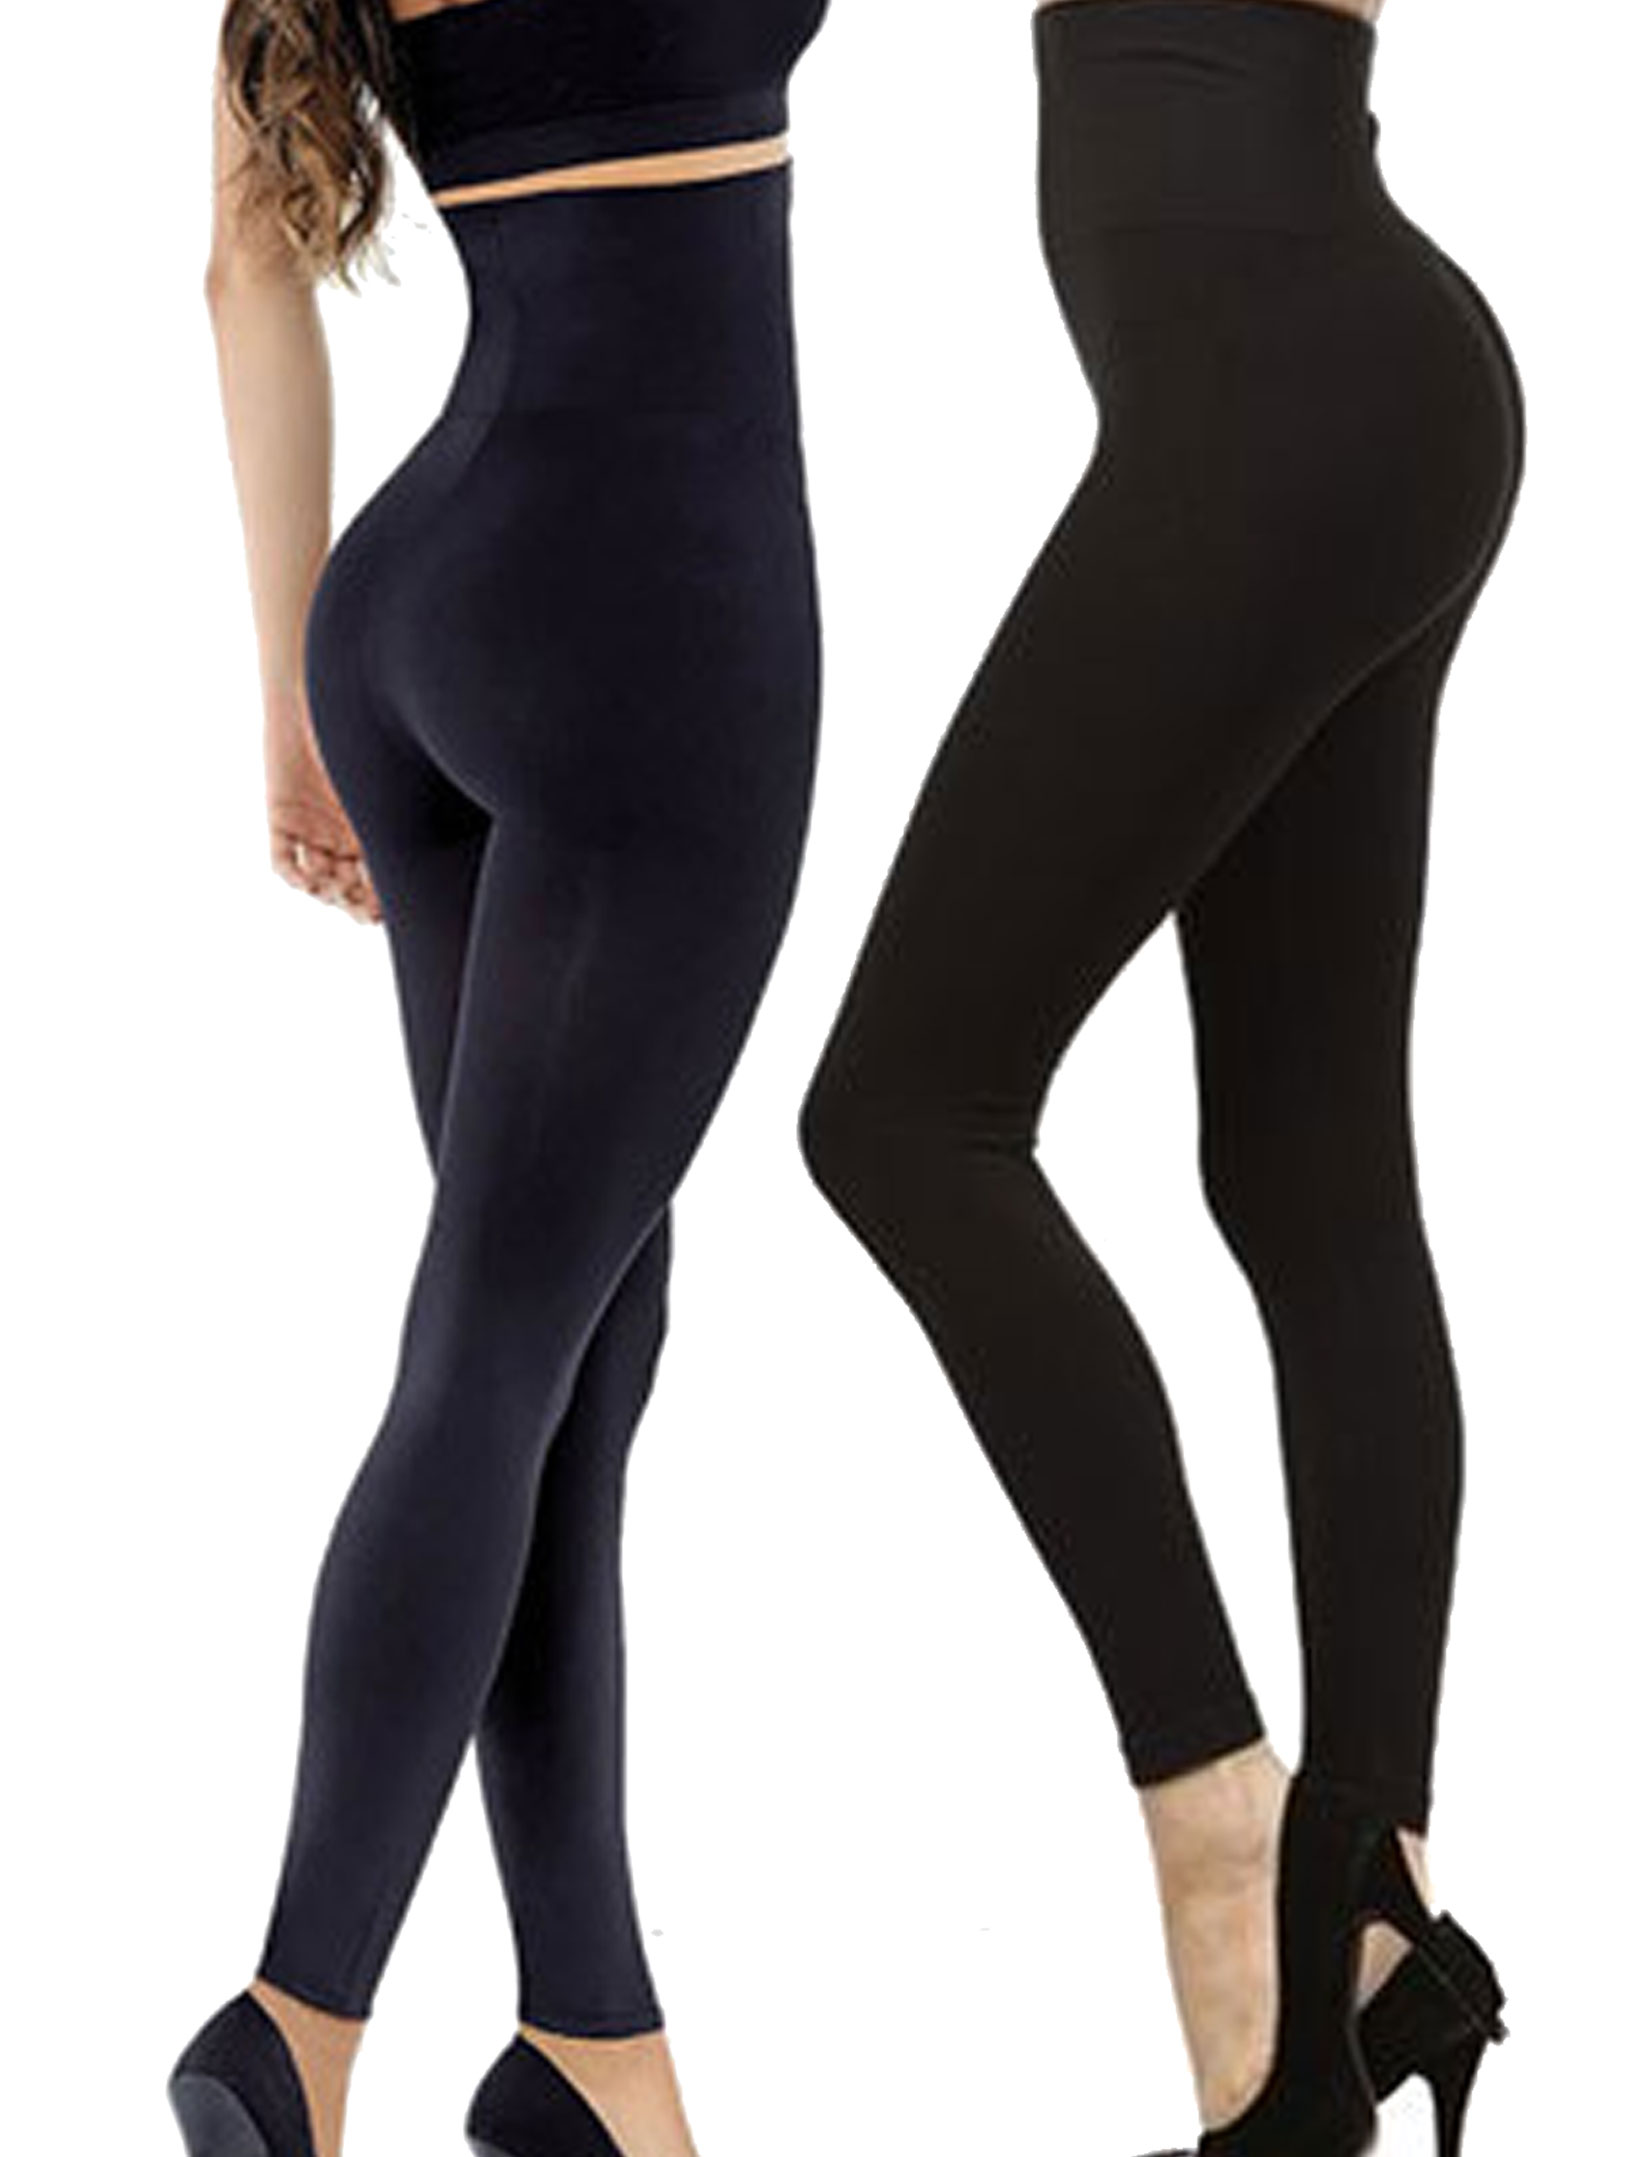 MAGIC WAIST-SHAPER LEGGINGS, leggings, I never thought leggings could  make such a difference! So soft, so comfortable, and so gorgeous, they give  me a boost of confidence every